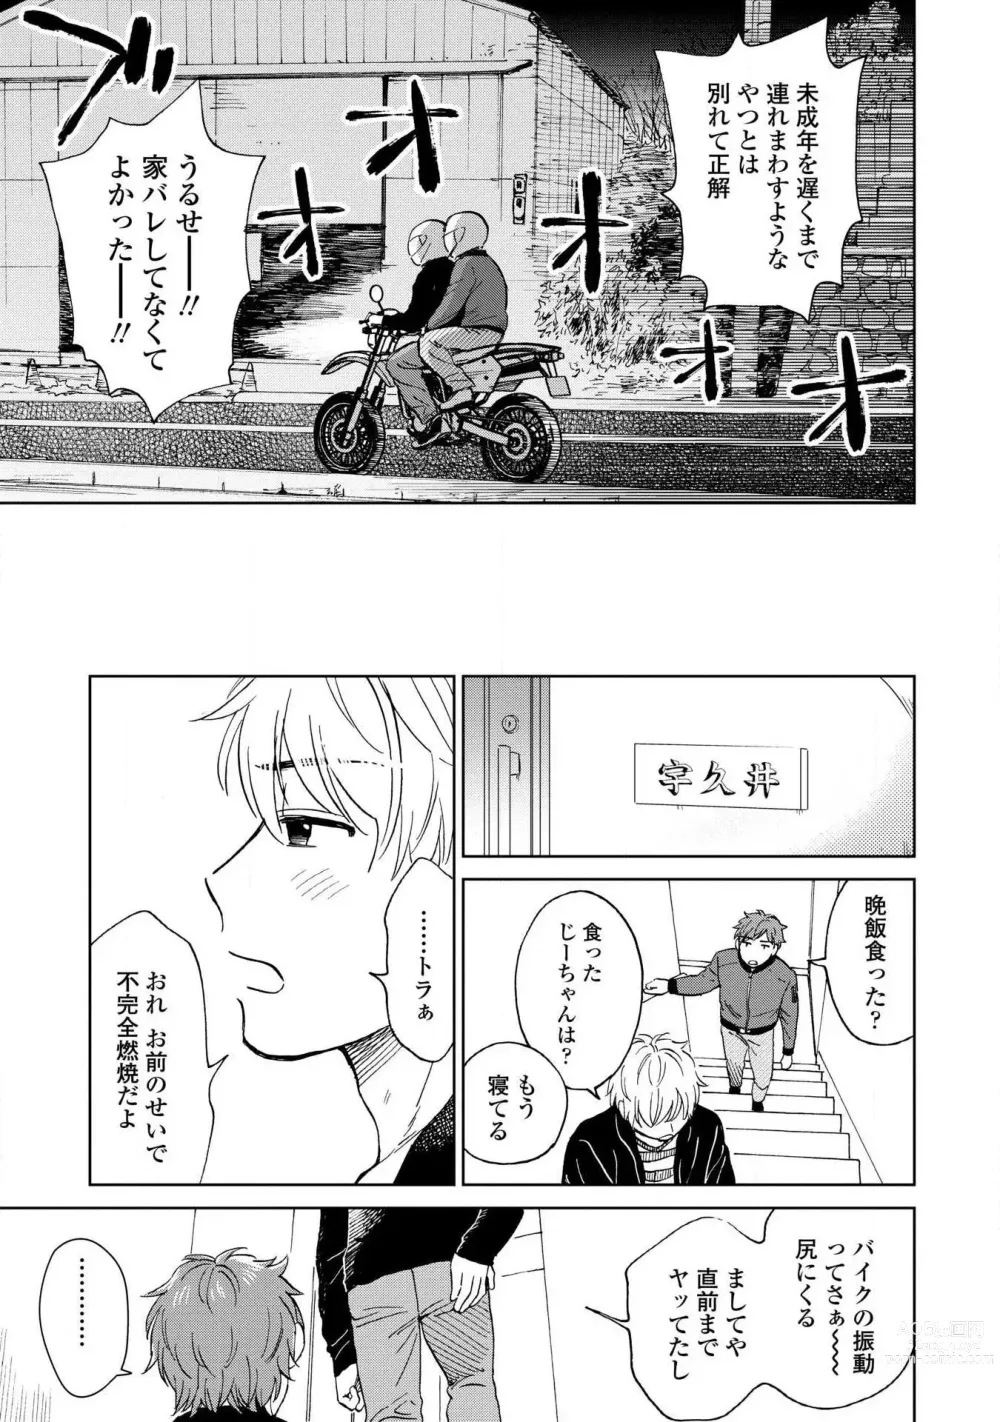 Page 9 of manga Magnet Kyoudai - Magnet Brothers